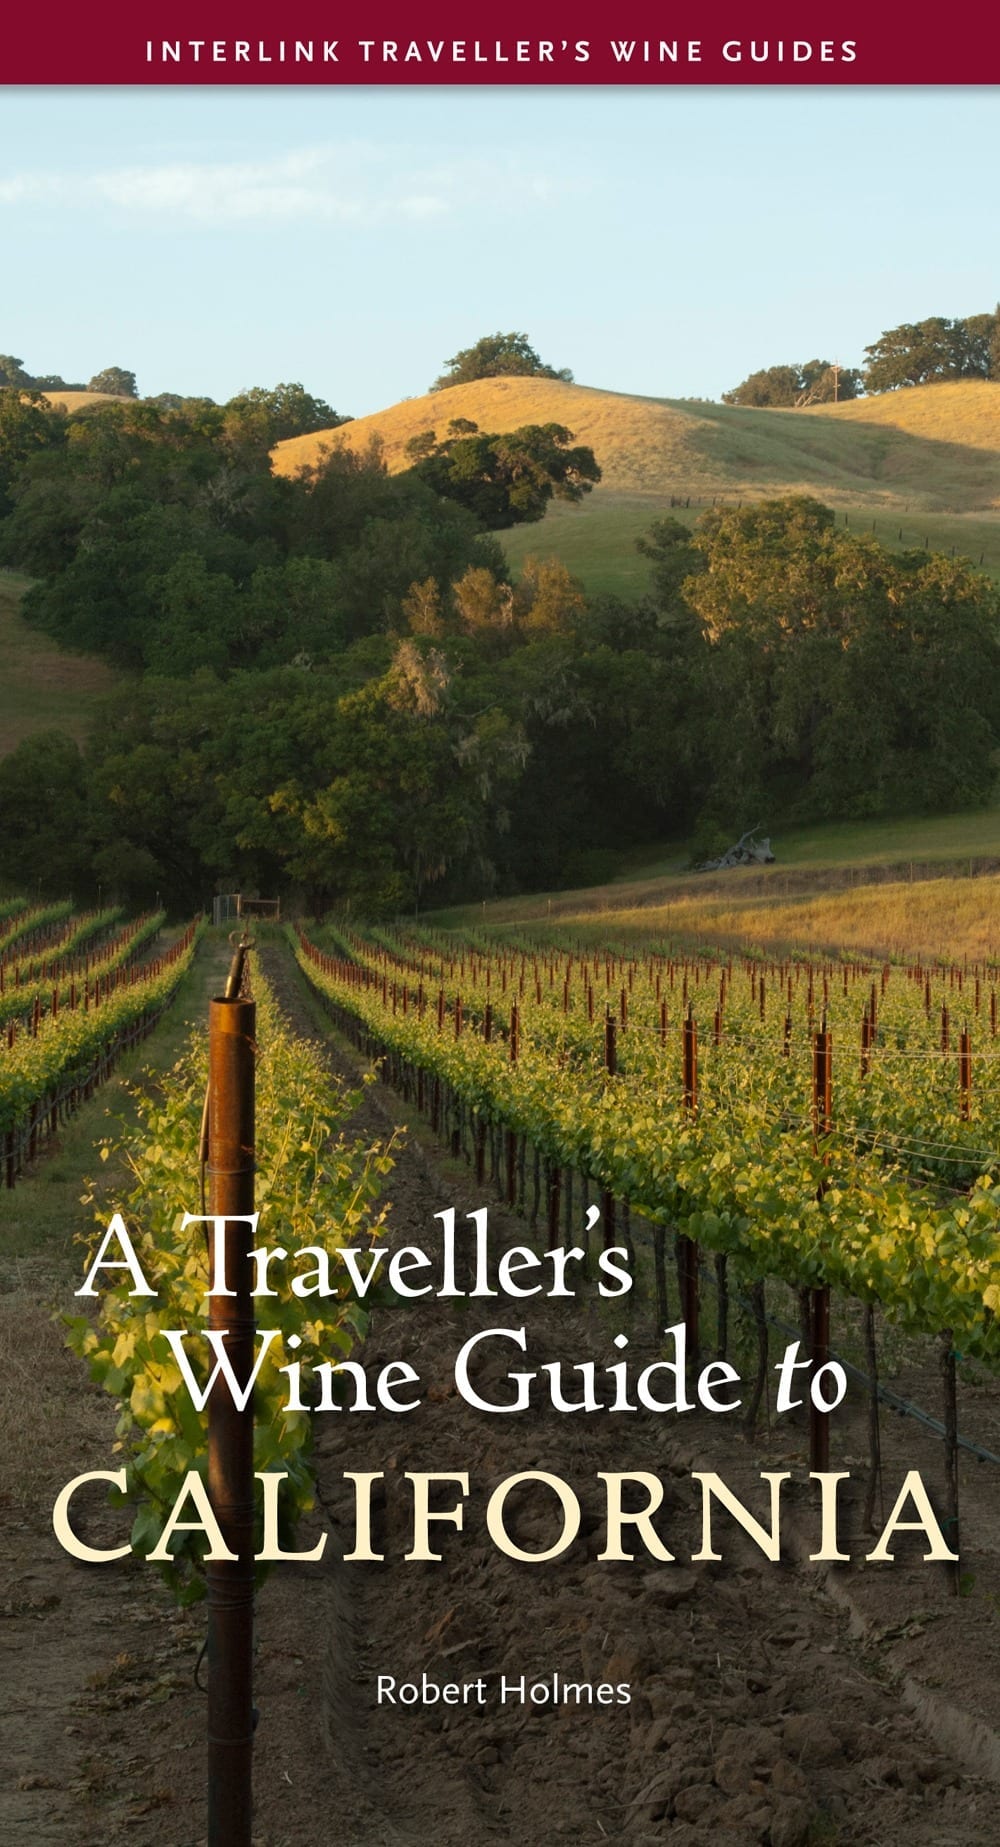 A Traveller’s Wine Guide to California